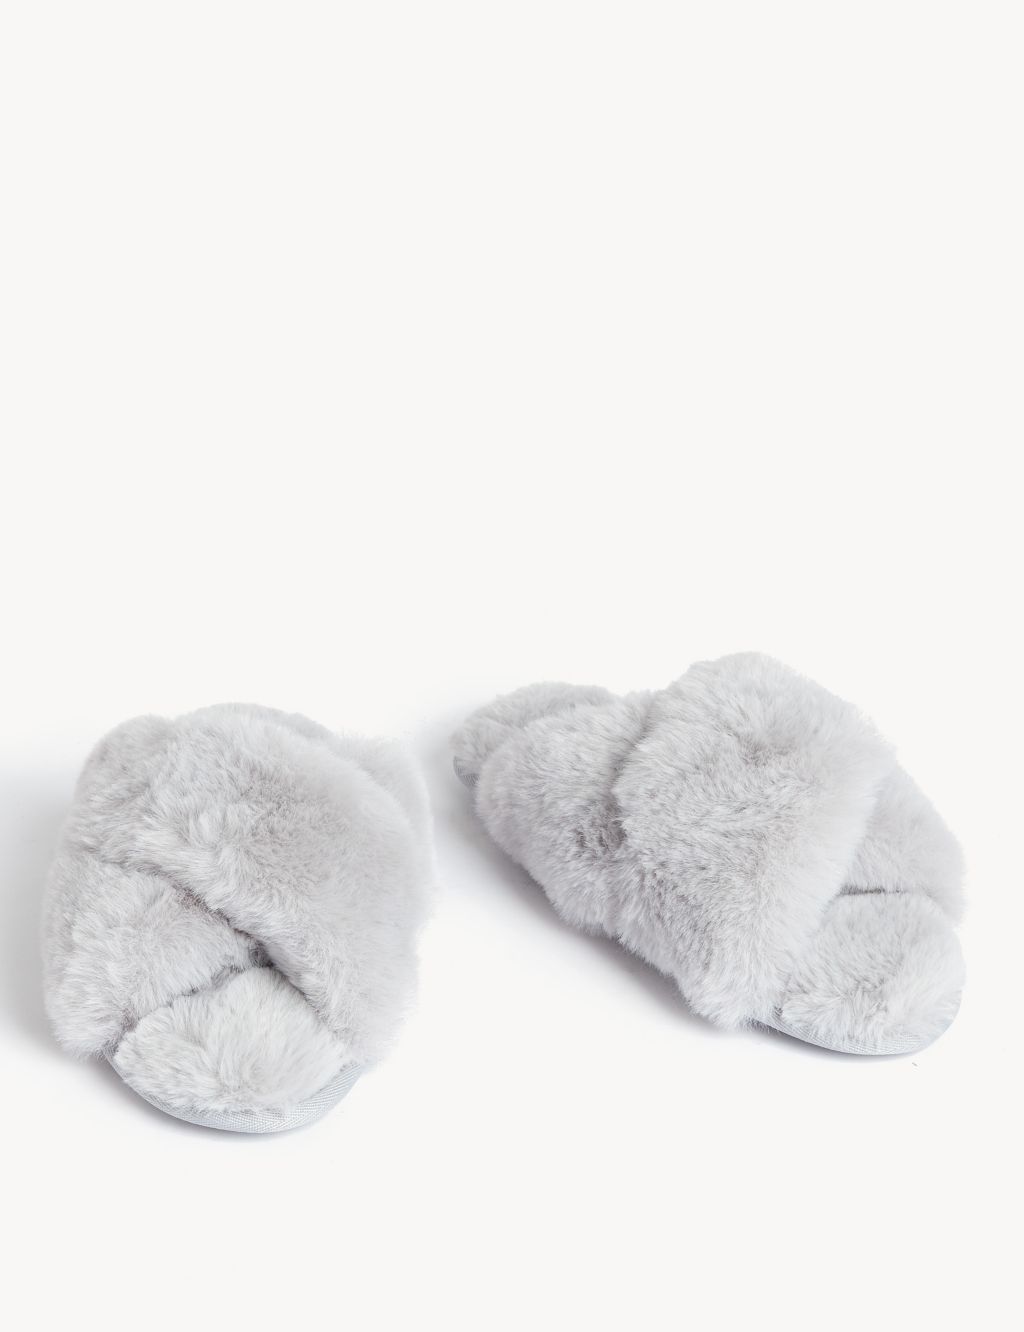 Faux Fur Crossover Slider Slippers image 2